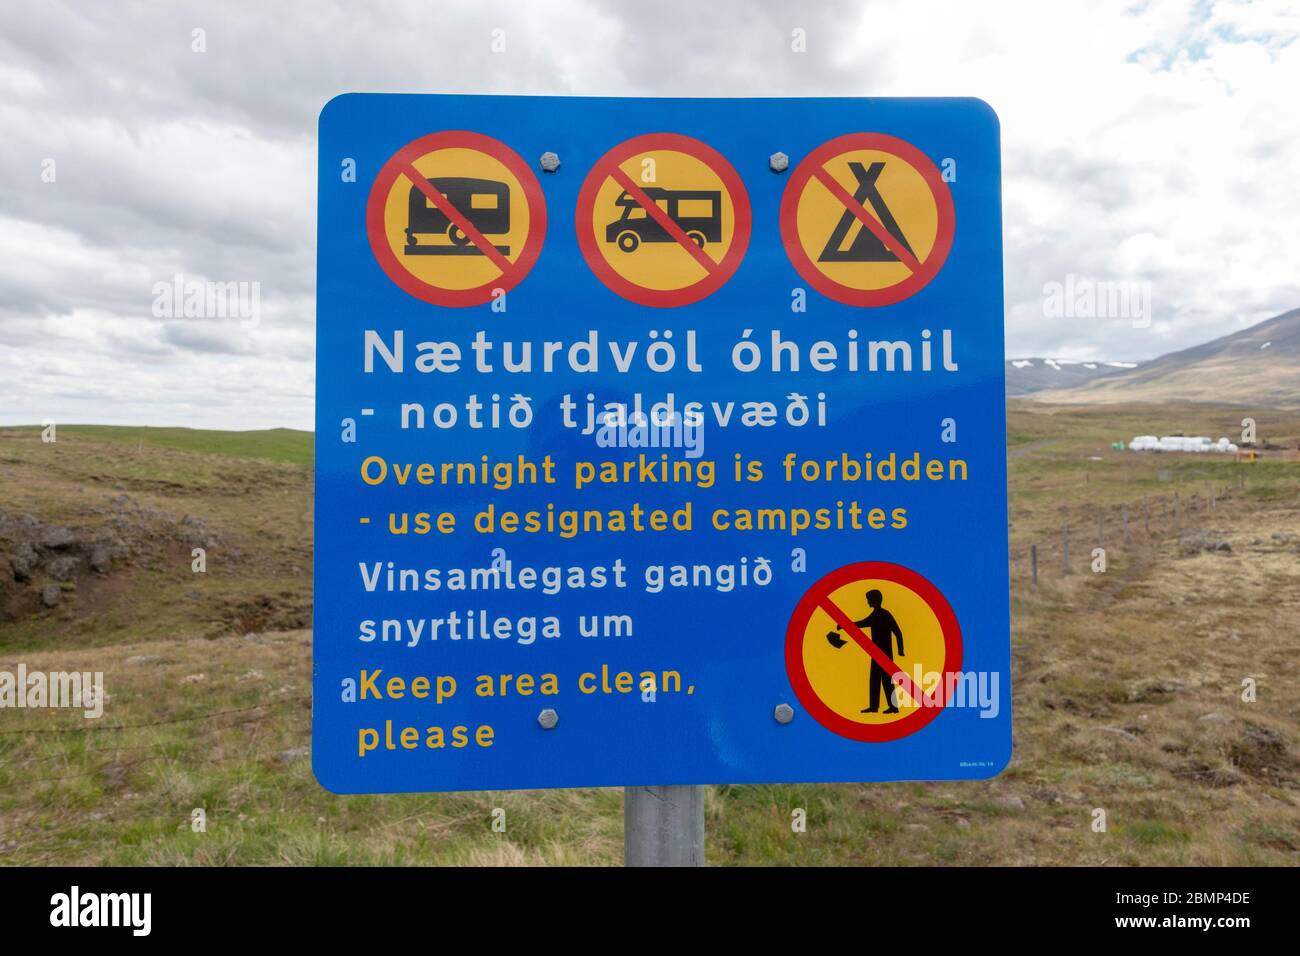 Typical roadside sign warning visitors that overnight camping is not allowed (only use designated camp sites), Skagafjörður, Iceland. Stock Photo